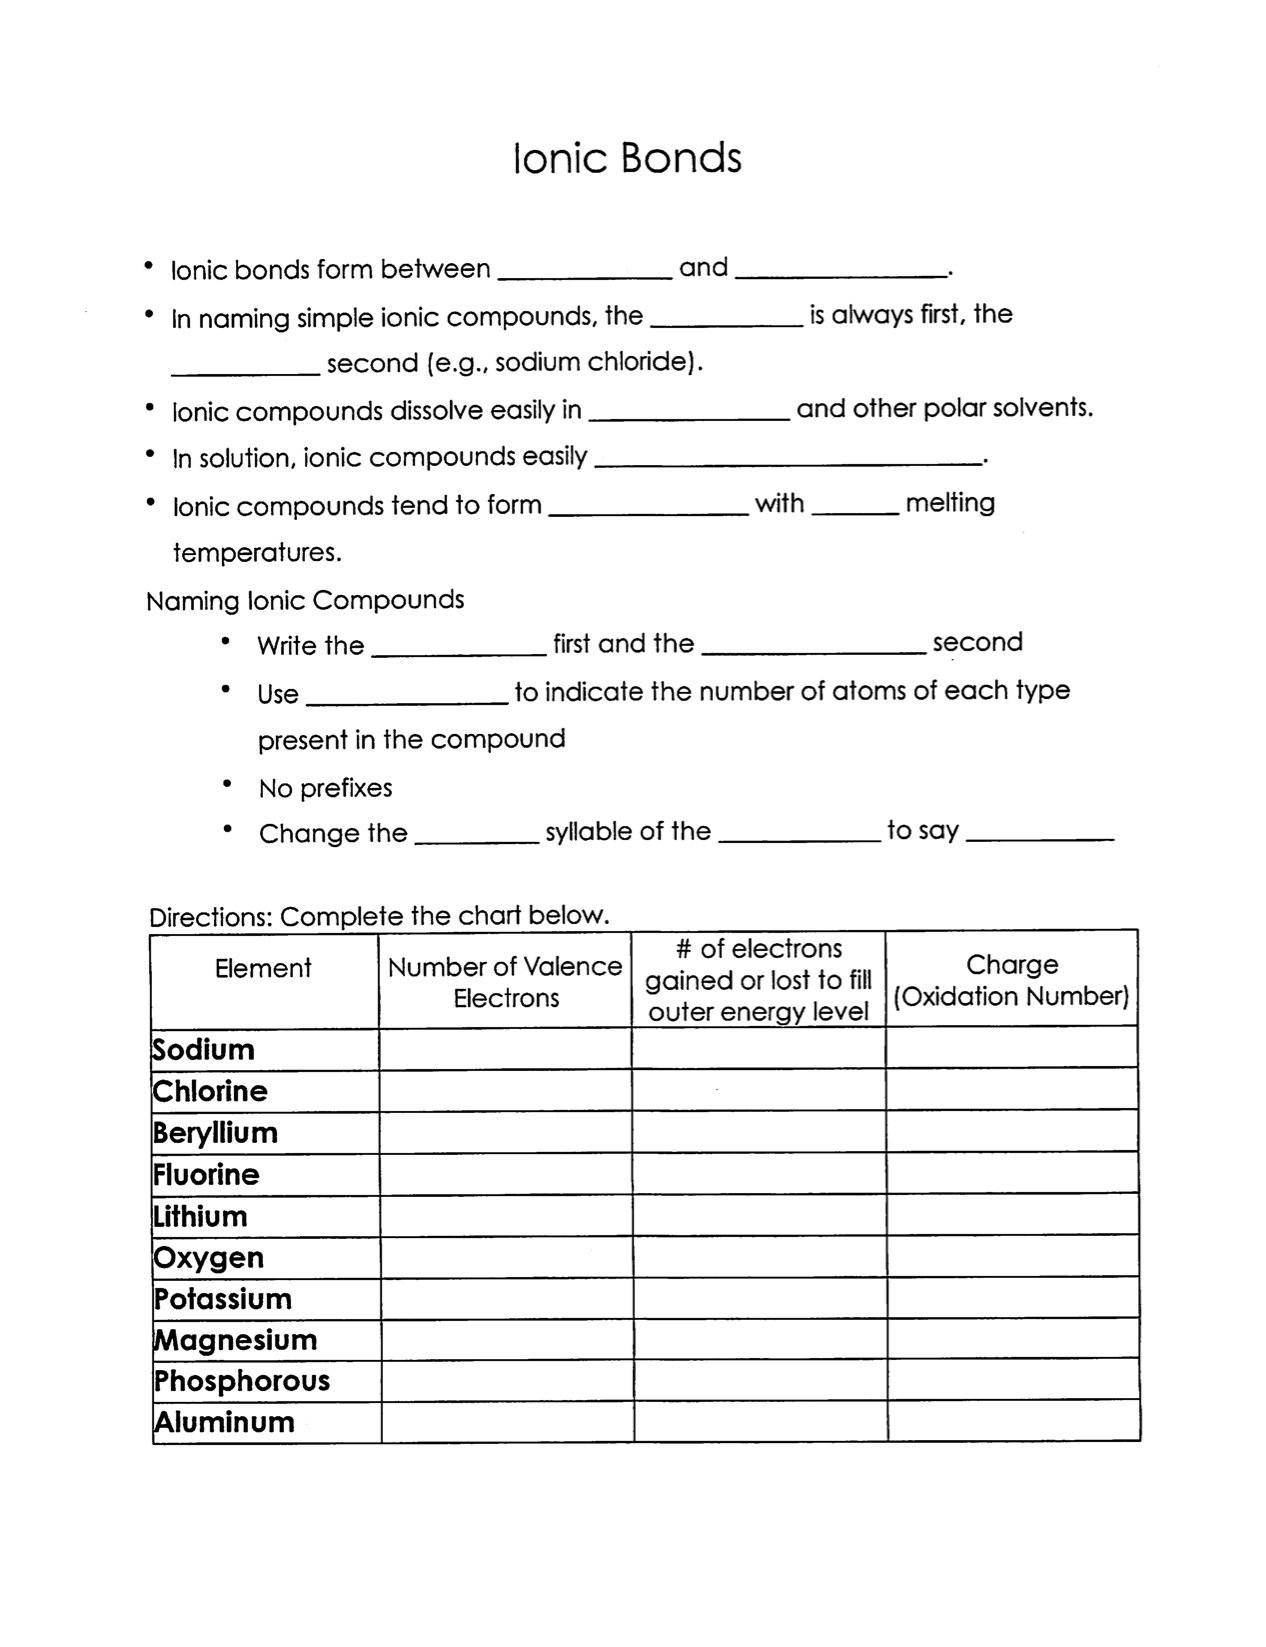 Christopher White  Warren County Public Schools As Well As Ionic Compounds Worksheet